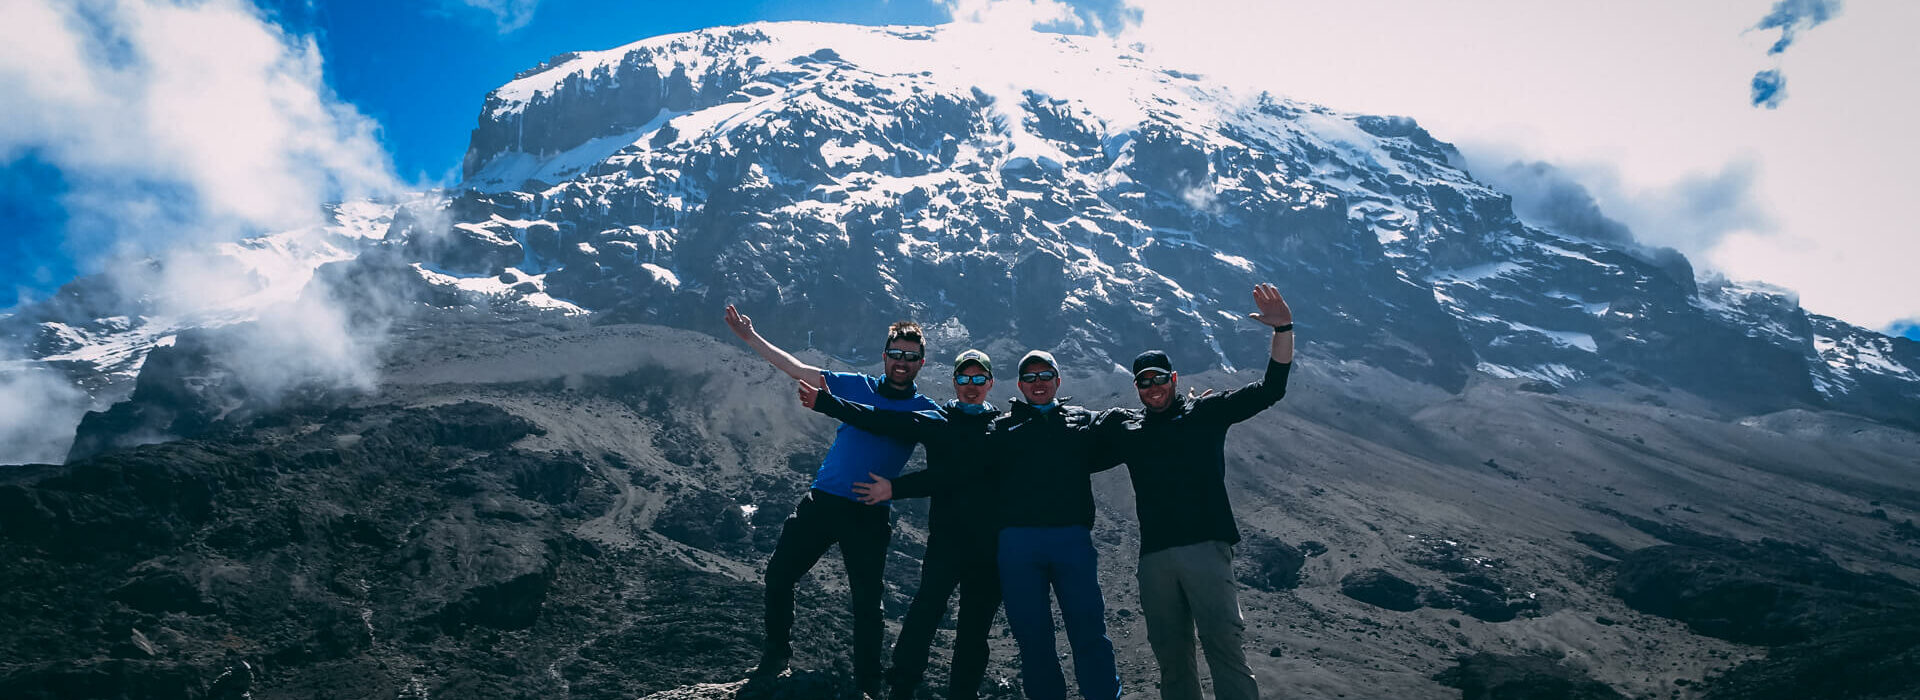 Kilimanjaro Expedition with Earth's Edge